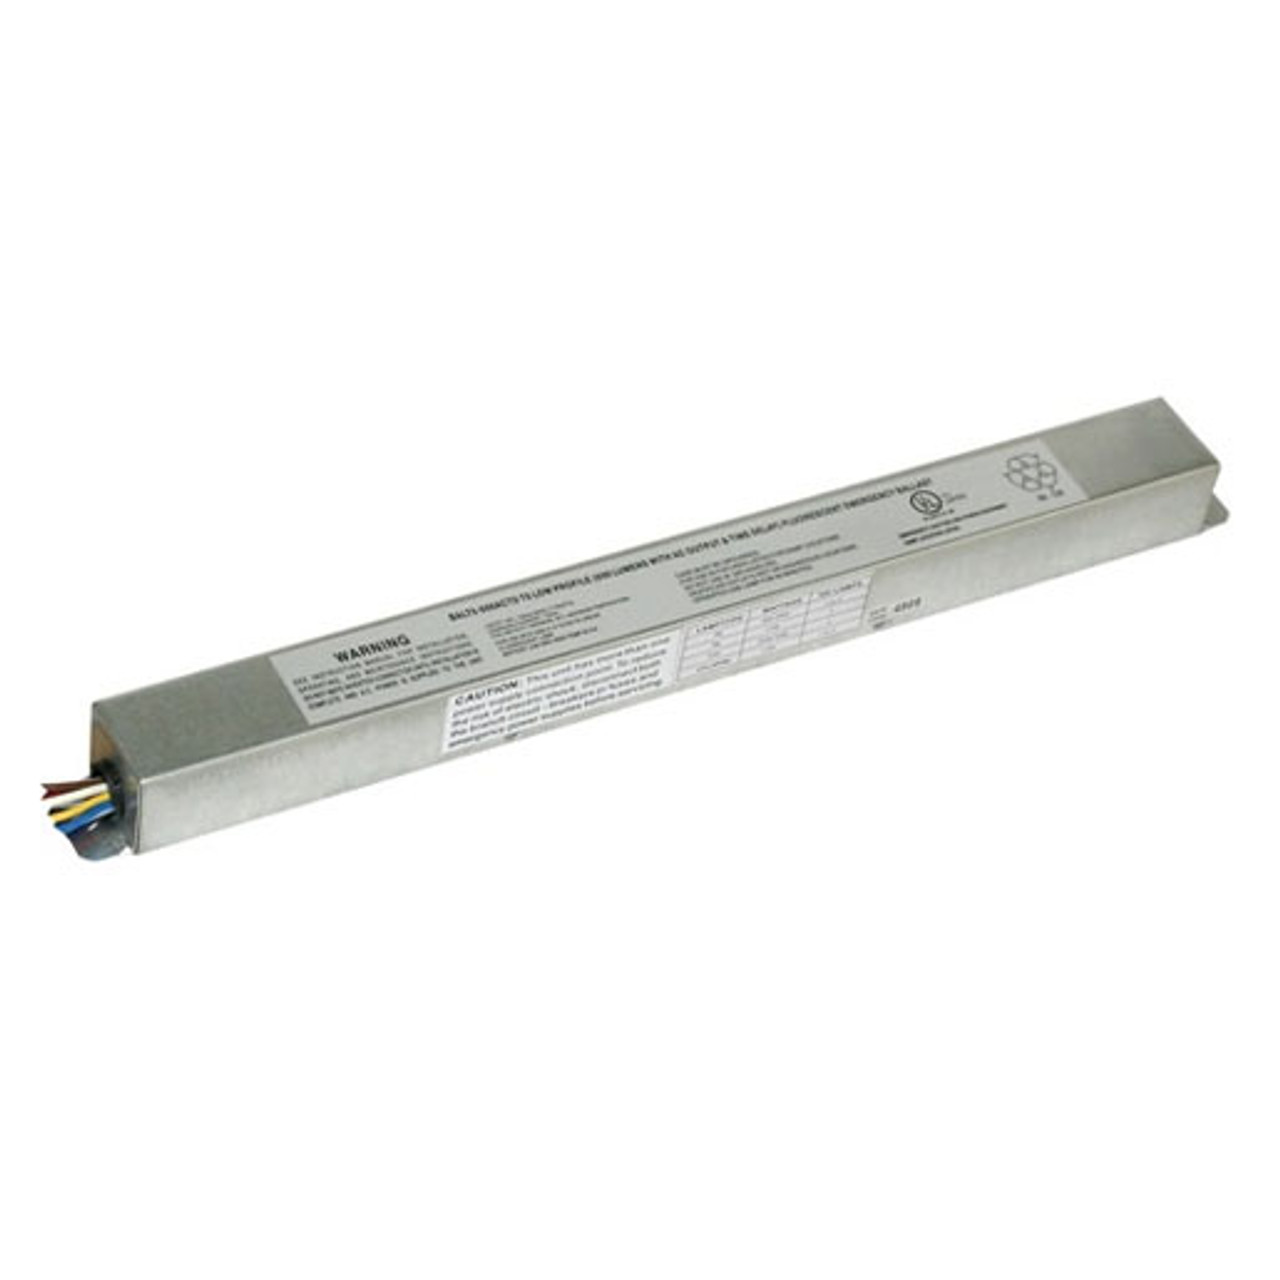 Works with or without an AC ballast to convert new or existing fluorescent fixtures in to unobtrusive emergency lighting.
Operates one or two lamps in the emergency mode for a minimum of 90-minutes.
Provides a maximum initial lumen output of 800 lumens.
Dual 120/277 voltage.
Charge rate/power “ON” LED indicator light and push-to-test switch for mandated code compliance testing.
6.0V long life, maintenance-free, rechargeable sealed NiCd battery.
Internal solid-state transfer switch automatically connects the internal battery to fluorescent lamp for minimum
90-minute emergency illumination.
Fully automatic solid-state, two rate charger initiates battery charging to recharge a discharged battery in 24 hours.
Time delay enhancement to overcome end-of-life circuit protection.
Suitable for installation inside, on top or in remote* of the fixture.
Can be used in both switched and unswitched fixtures.
UL Listed for factory or field installation.